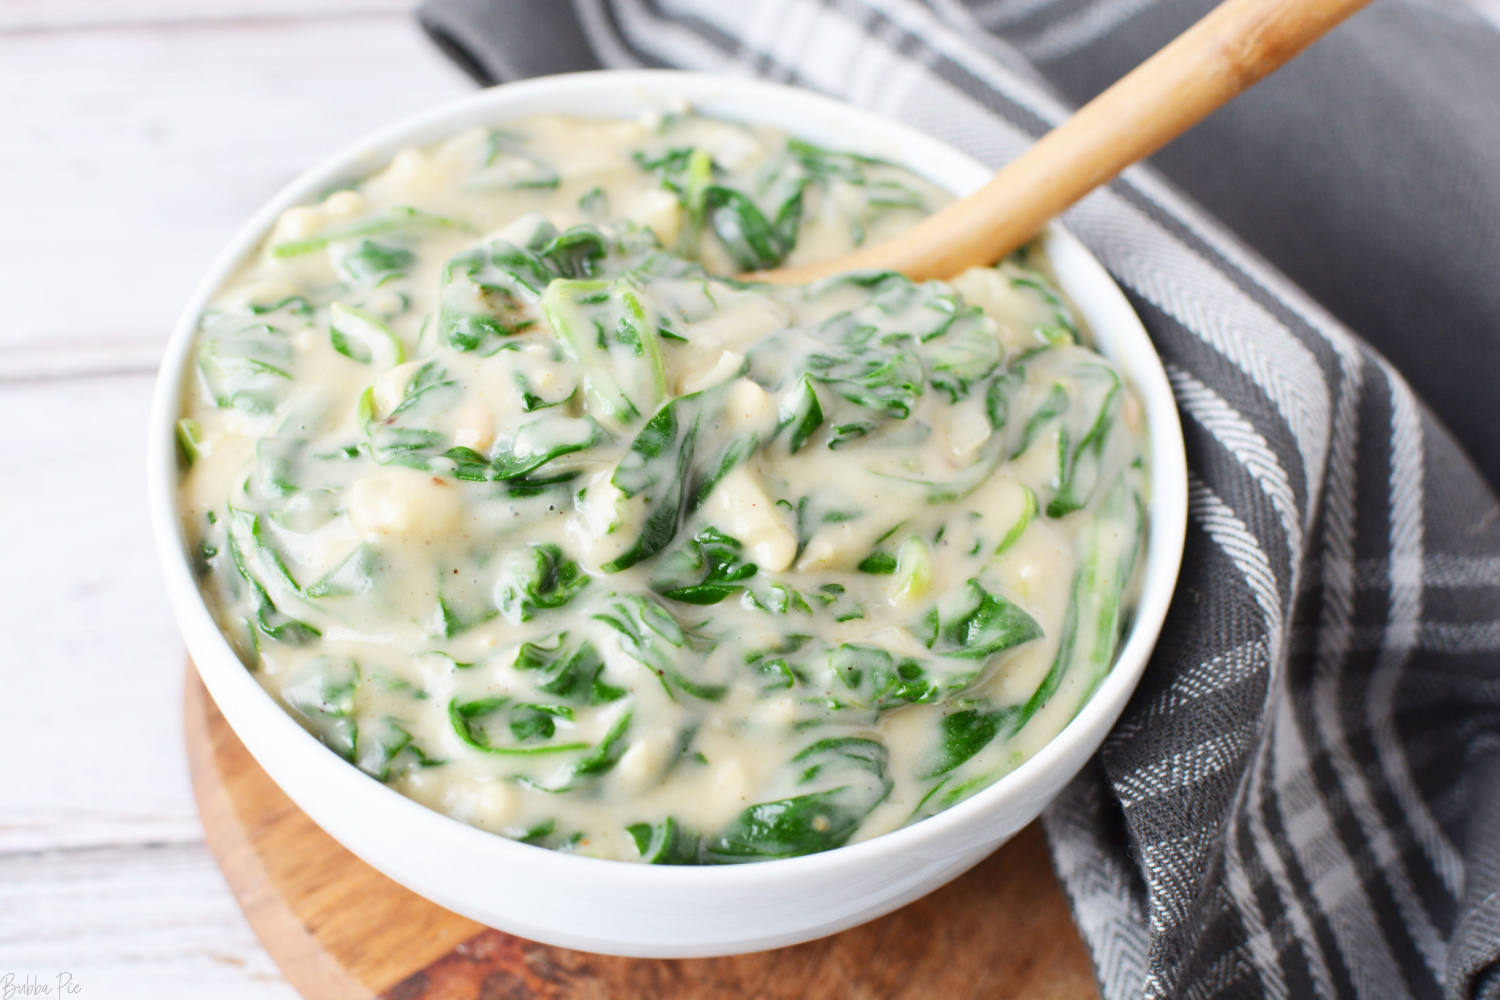 Easy Creamed Spinach Recipe being eaten as a side dish.